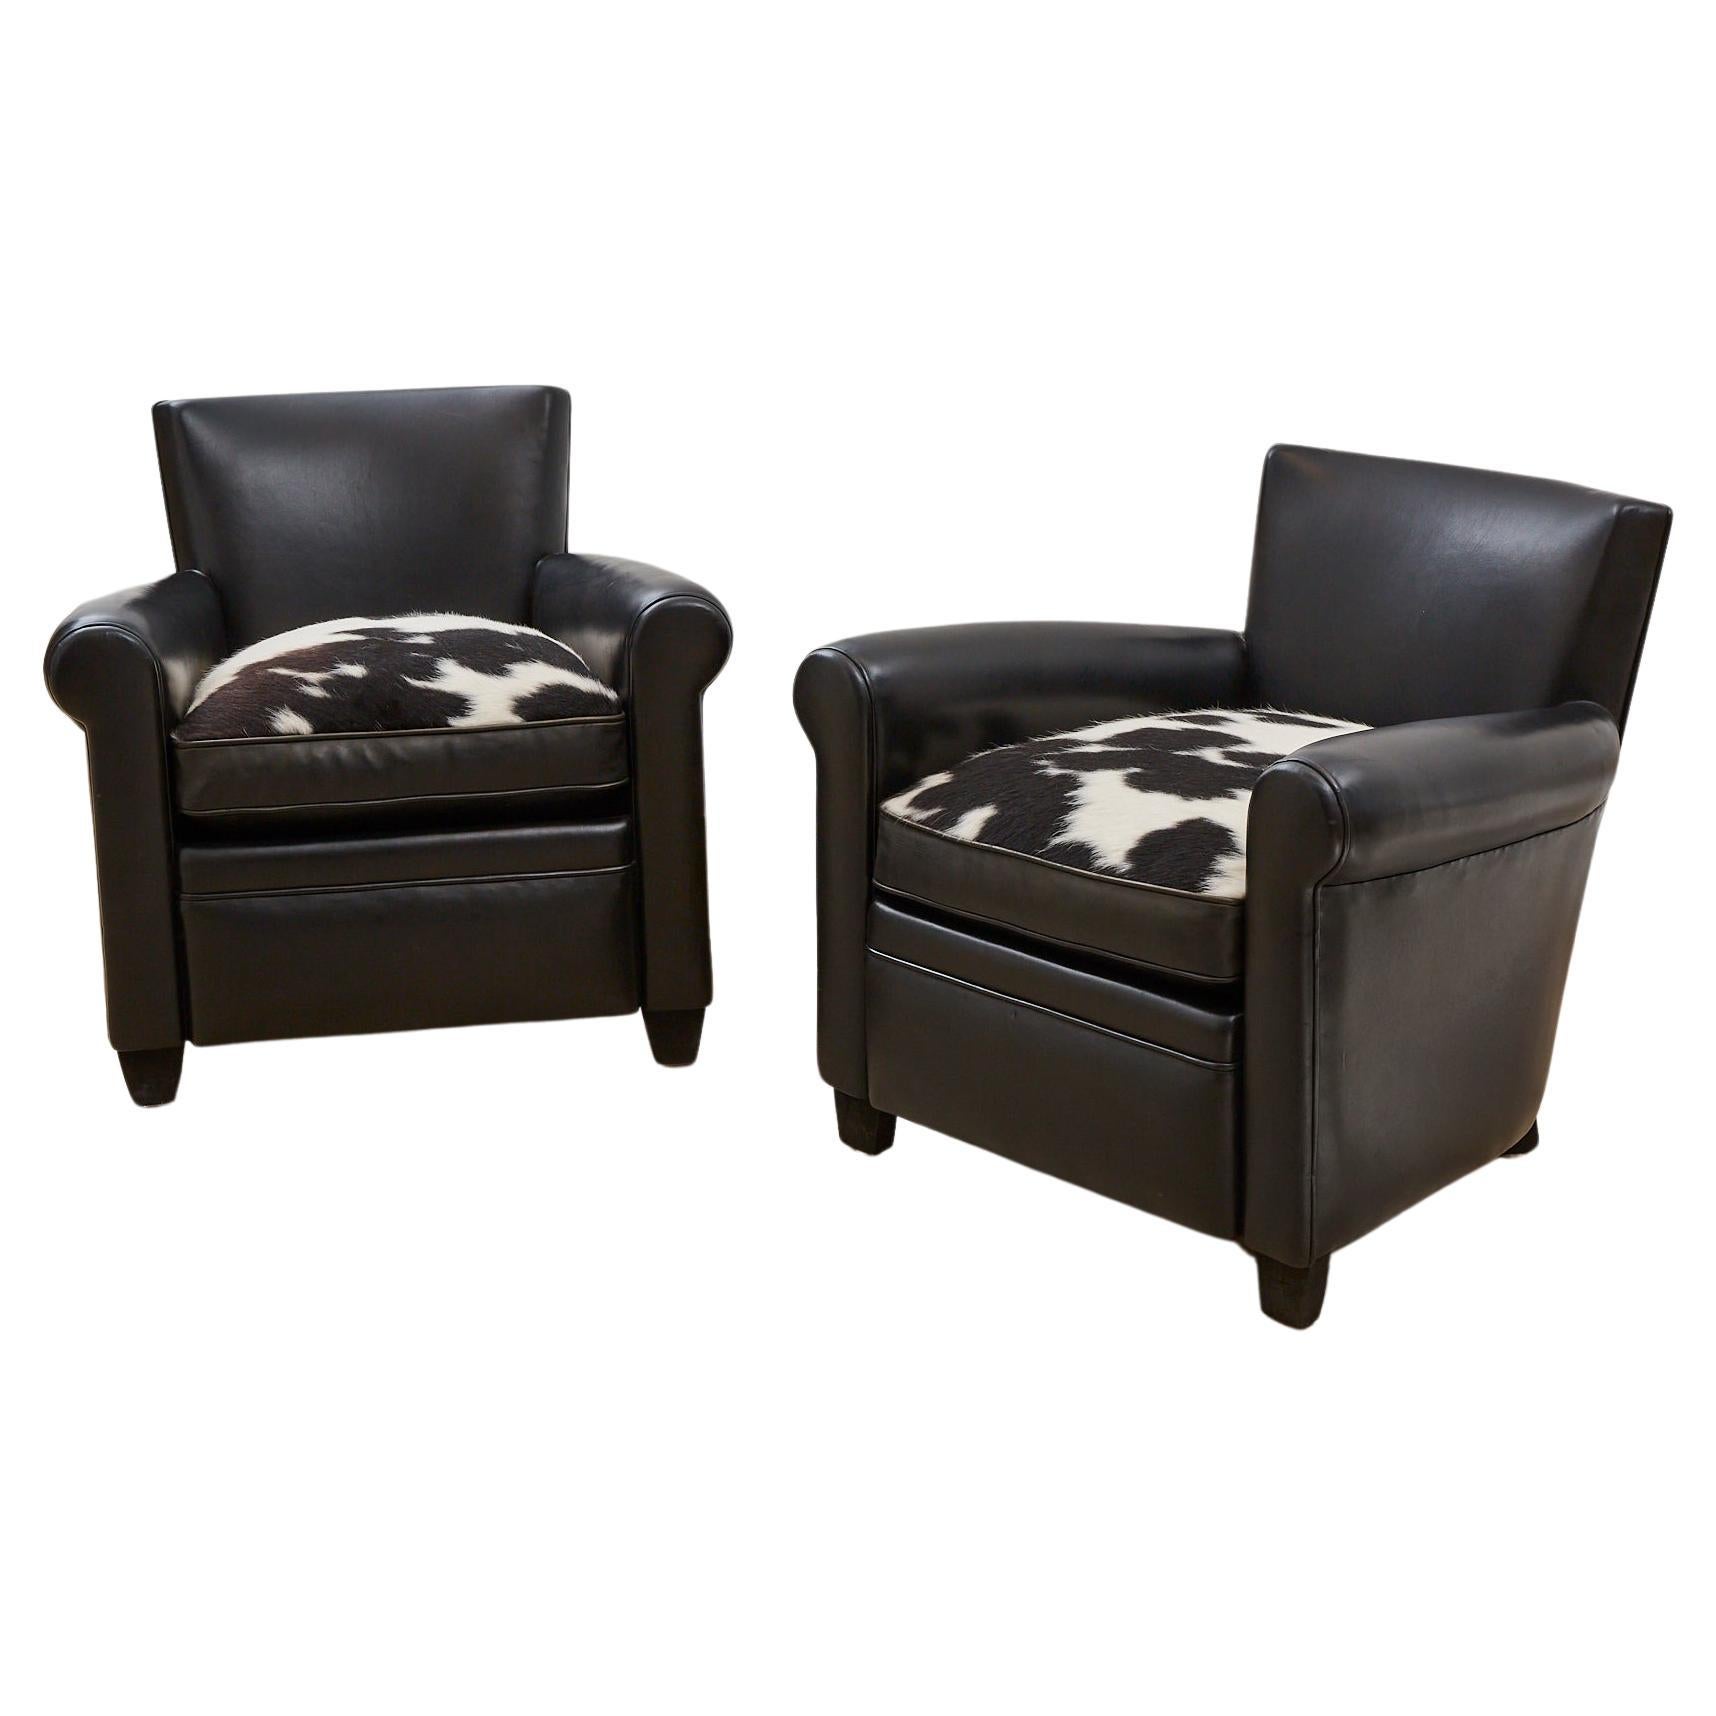 Pair of Black leather club chair / armchair cow hide seat For Sale